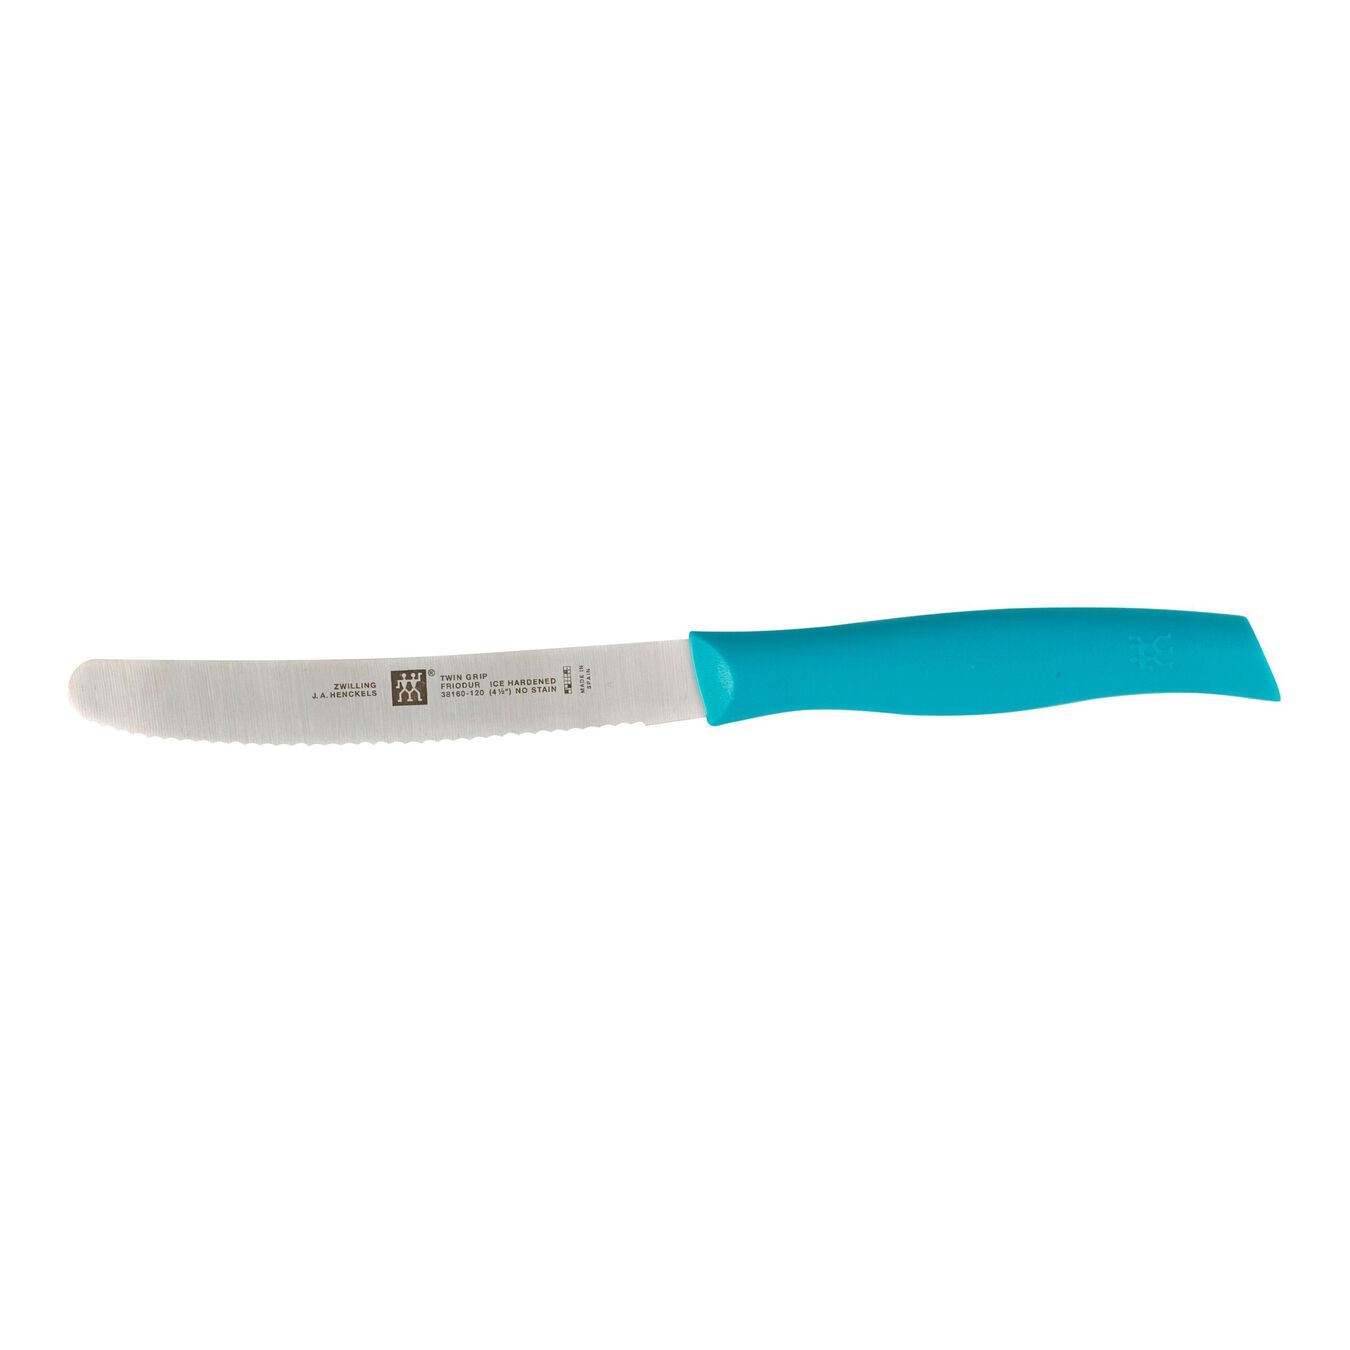 Zwilling Twin Grip Tomato / Bagel Knife with Scalloped Edge 4.5 inch - Blue